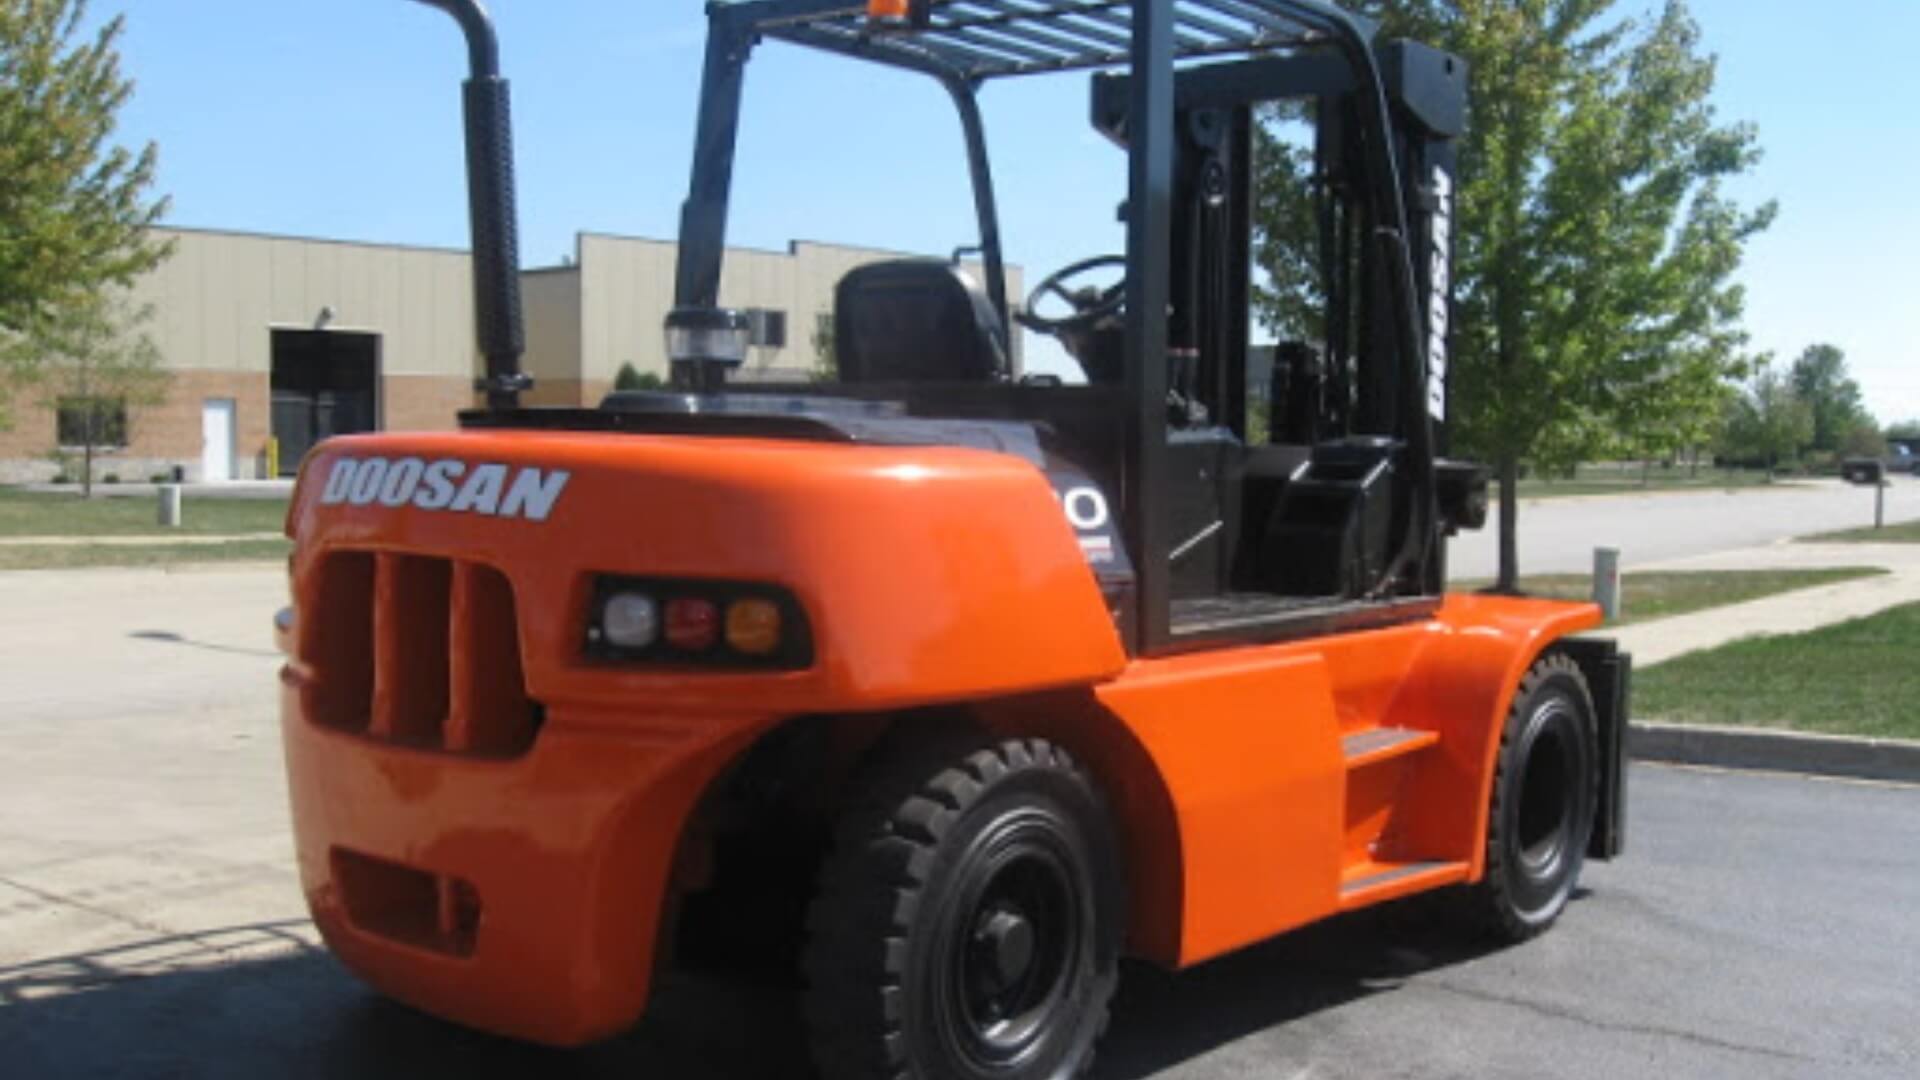 Operating your forklifts and warehouse